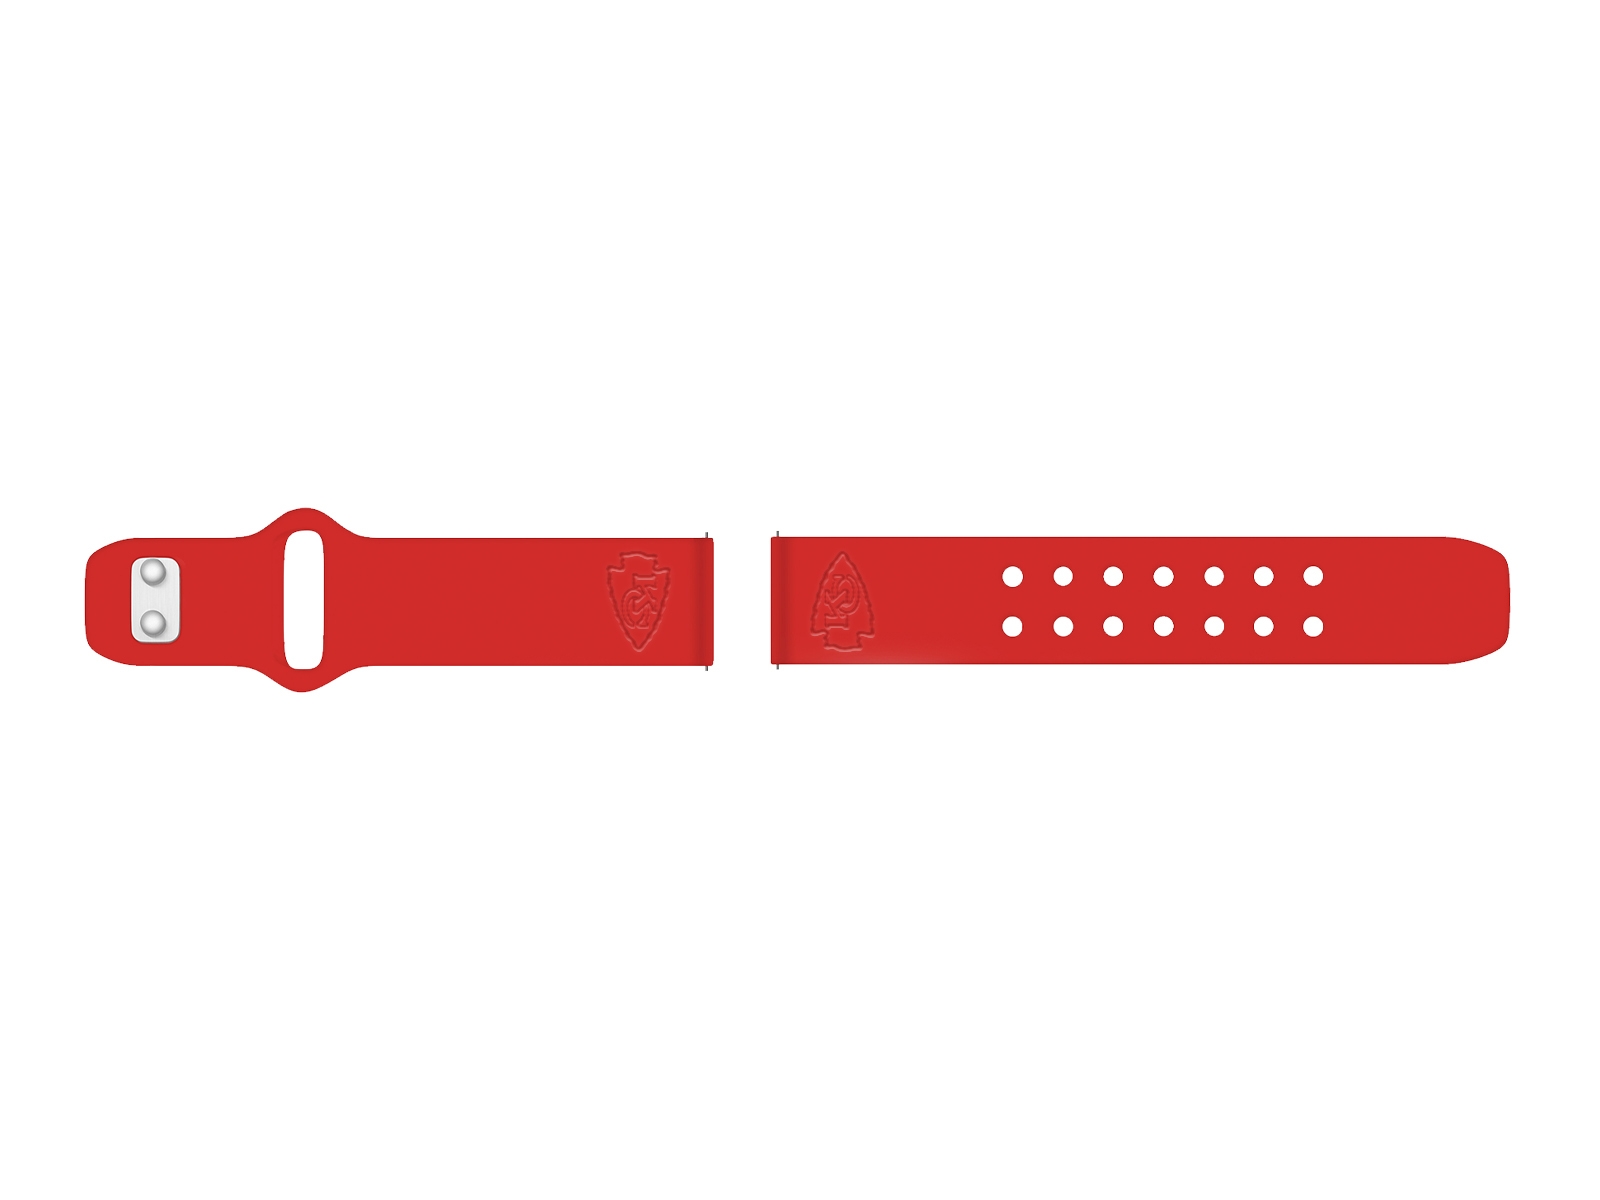  Game Time Kansas City Chiefs HD Watch Band Compatible